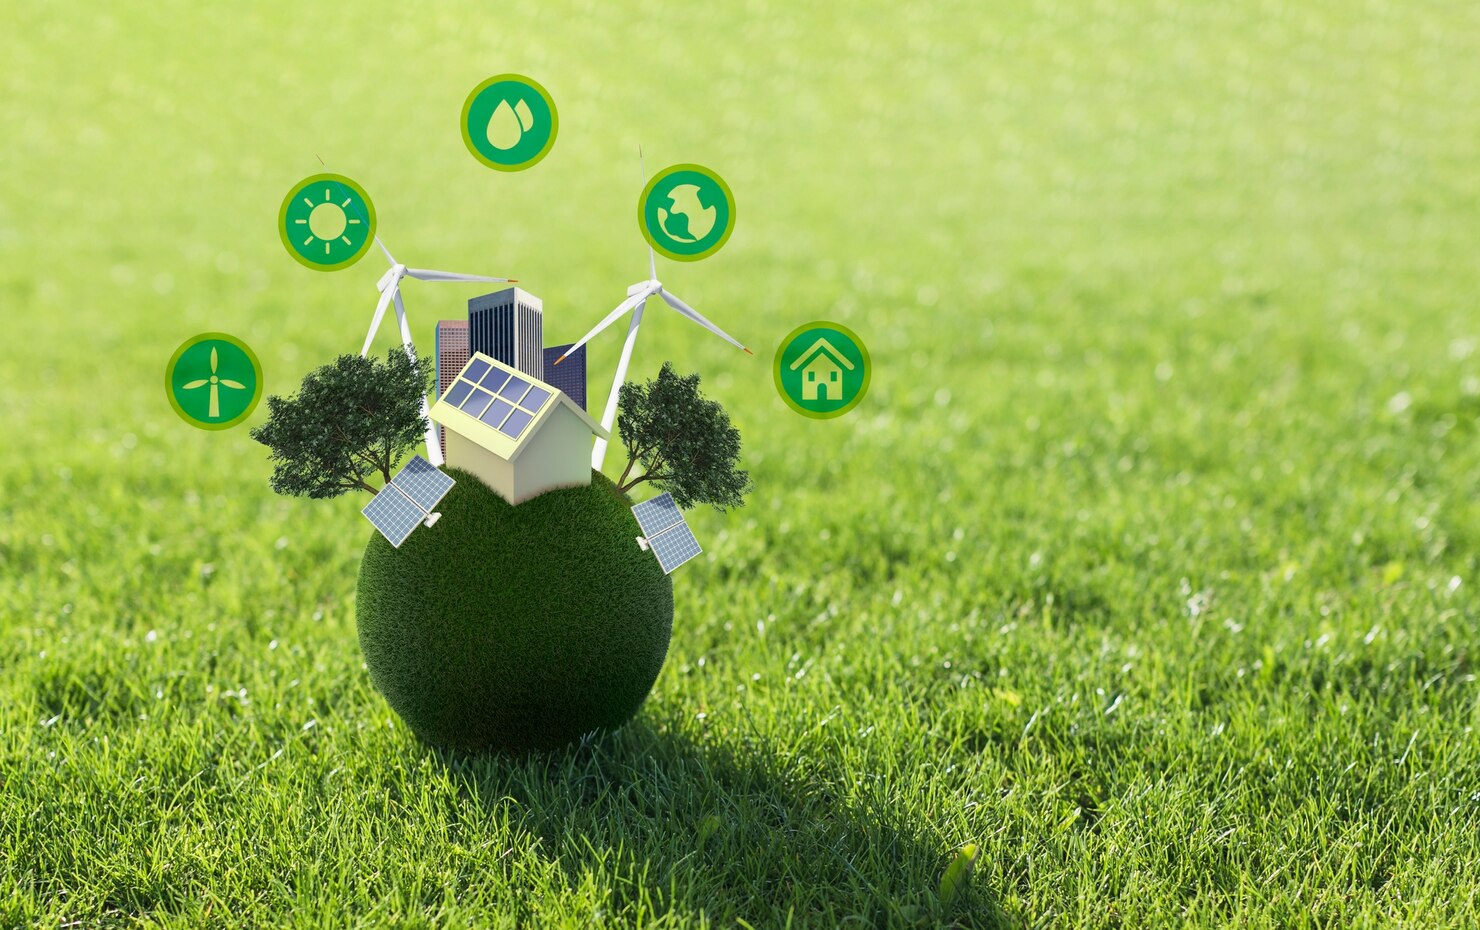 Image of house model on grass with icons representing various ESG technologies